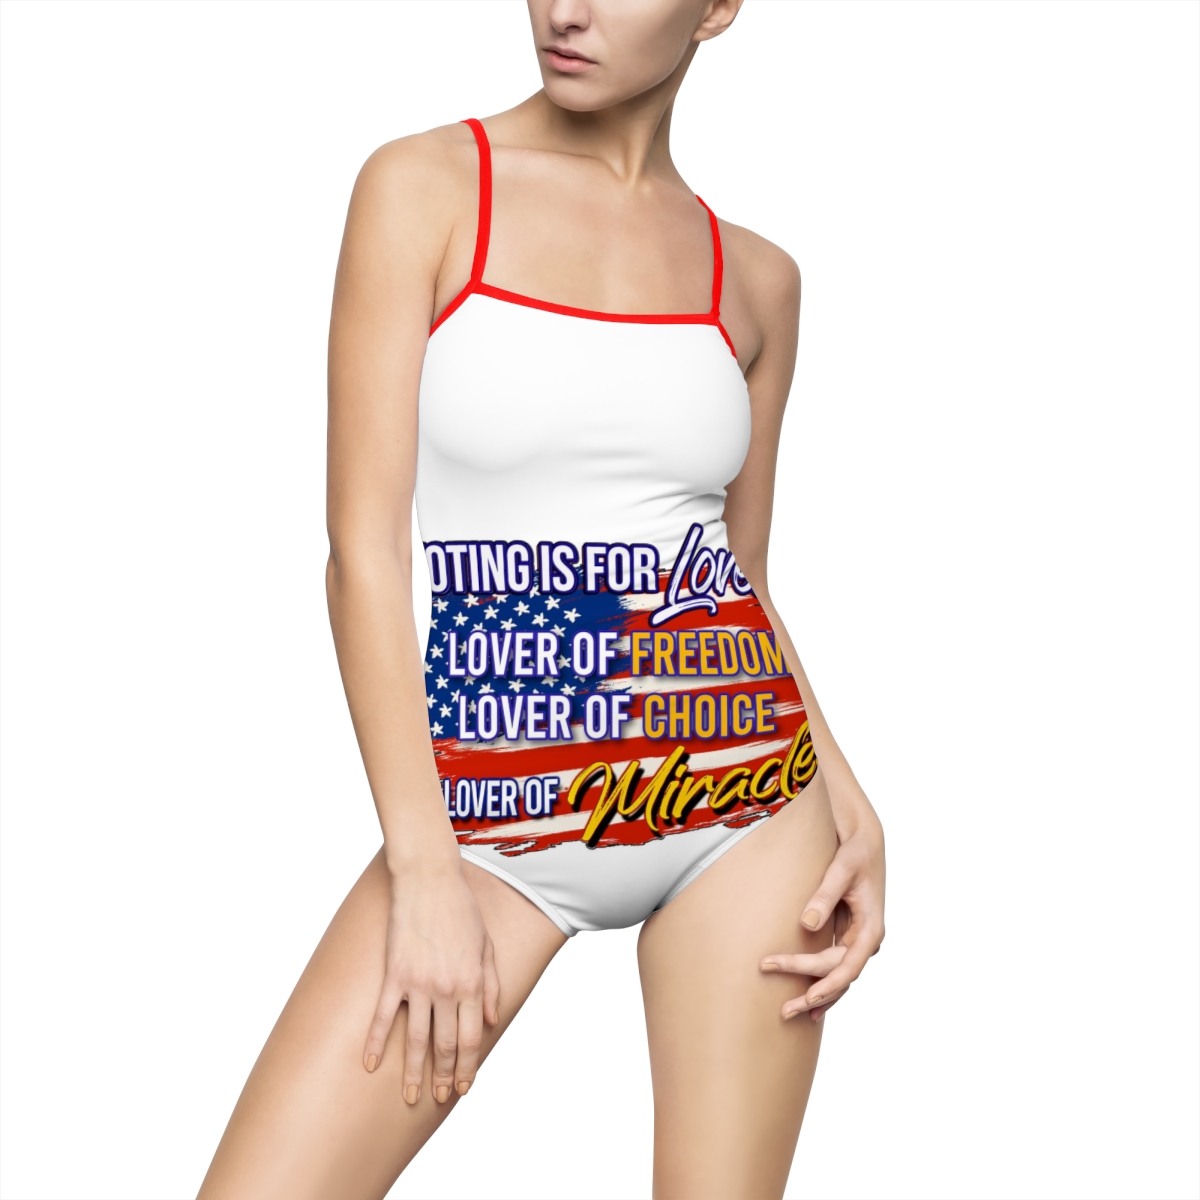 Lover of Miracles Women's One-piece Swimsuit (AOP) product thumbnail image